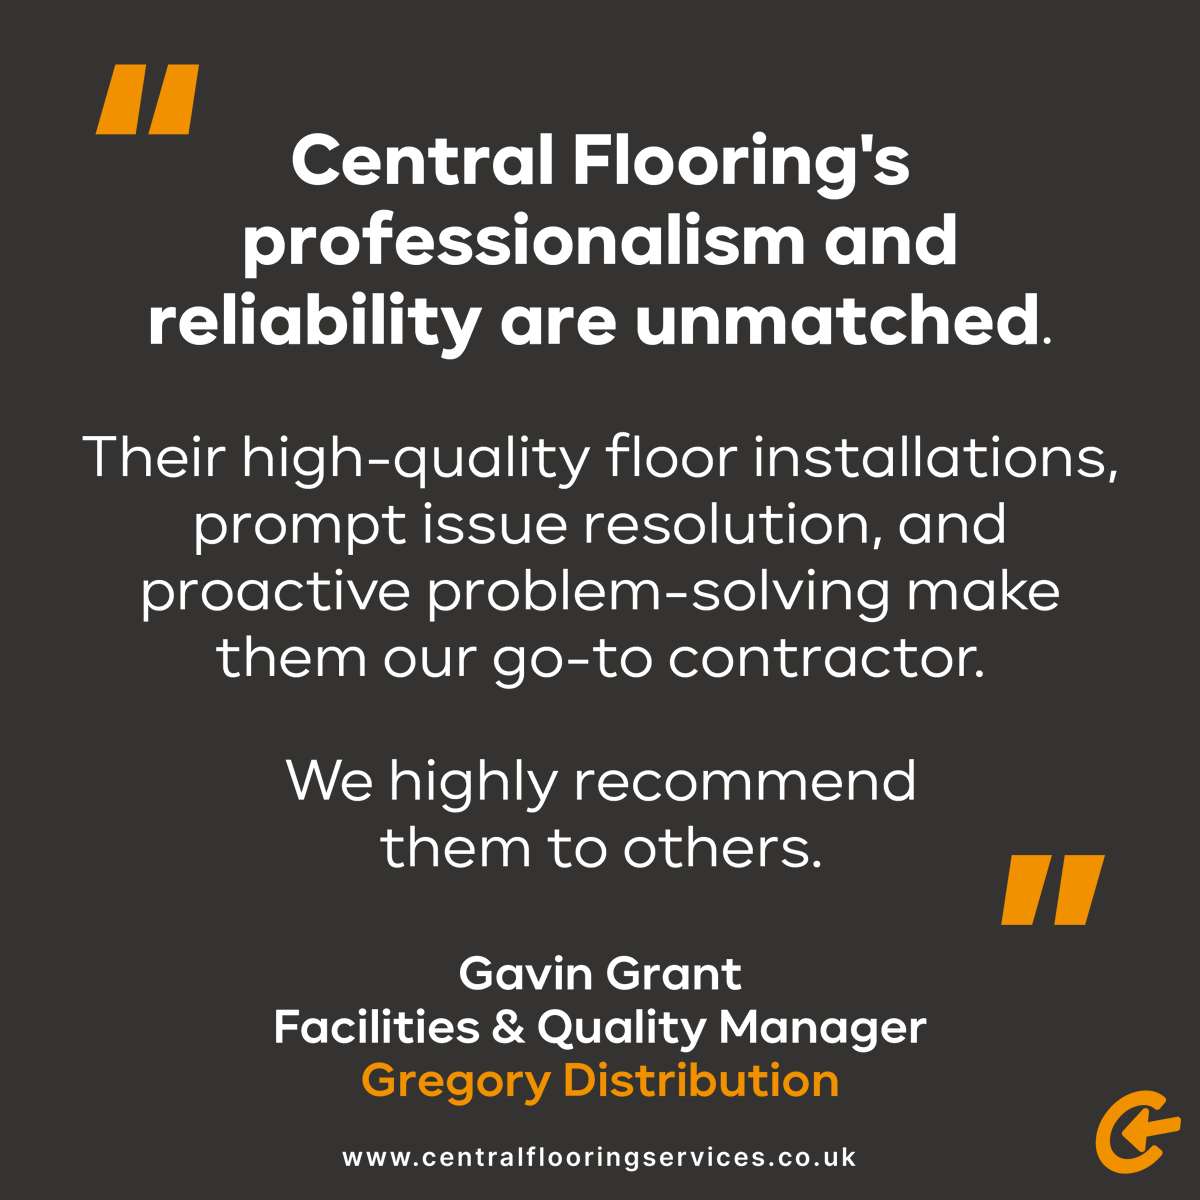 Gregory Distribution is a privately owned logistics business. Specialising in moving finished goods and raw materials, Gregory’s has been trucking the length and breadth of Britain for more than 100-years. 🚚🇬🇧

#CentralFlooring #ResinFlooring #Logistics #GregoryDistribution